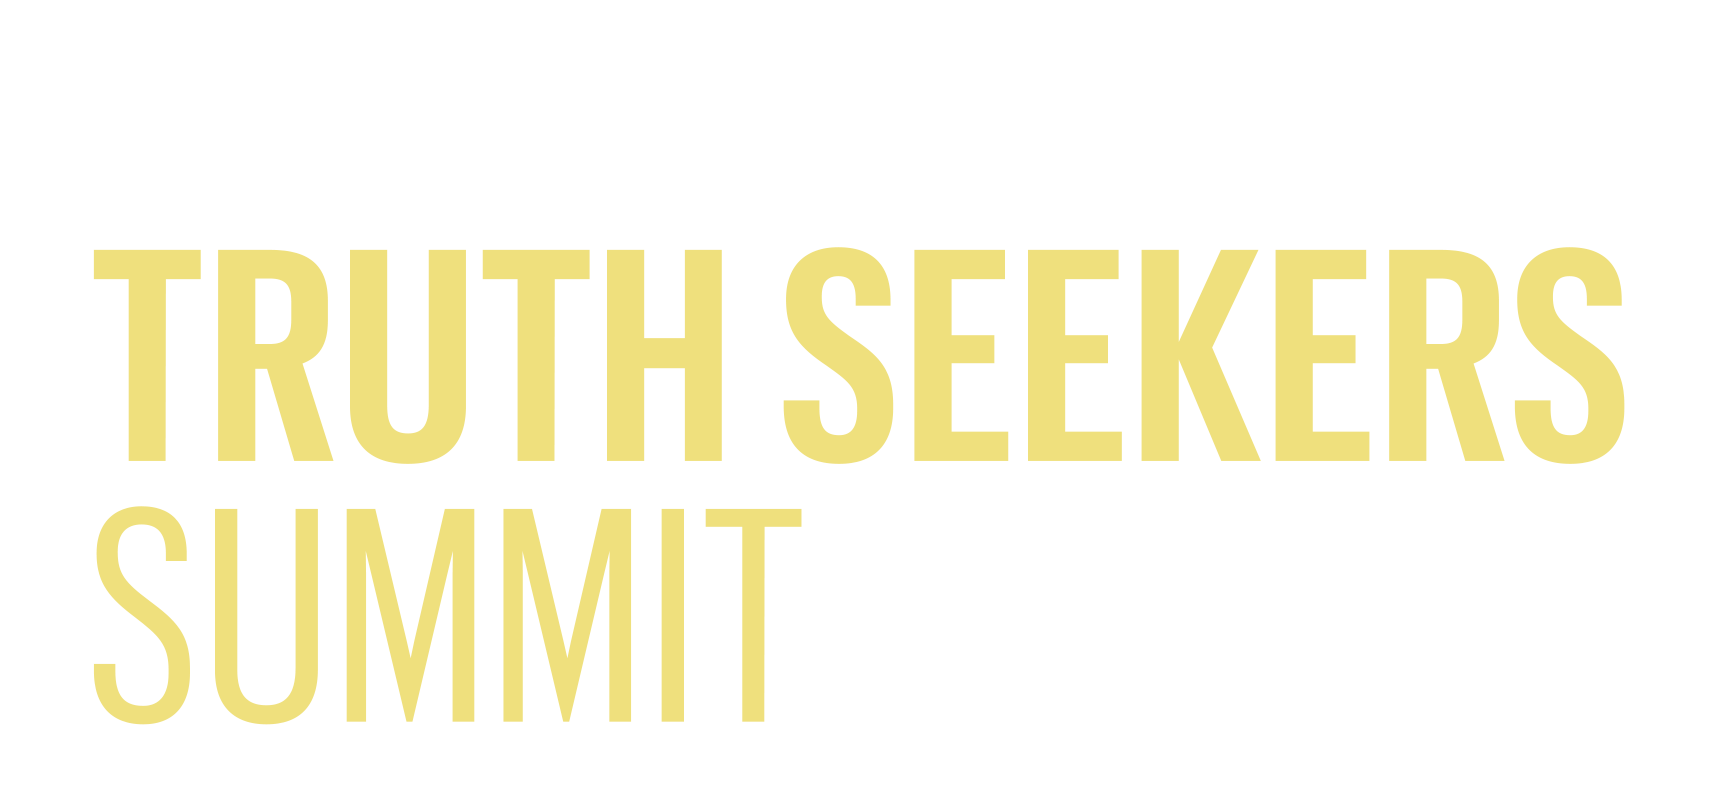 Online: Variety & Rolling Stone Truth Seekers Summit